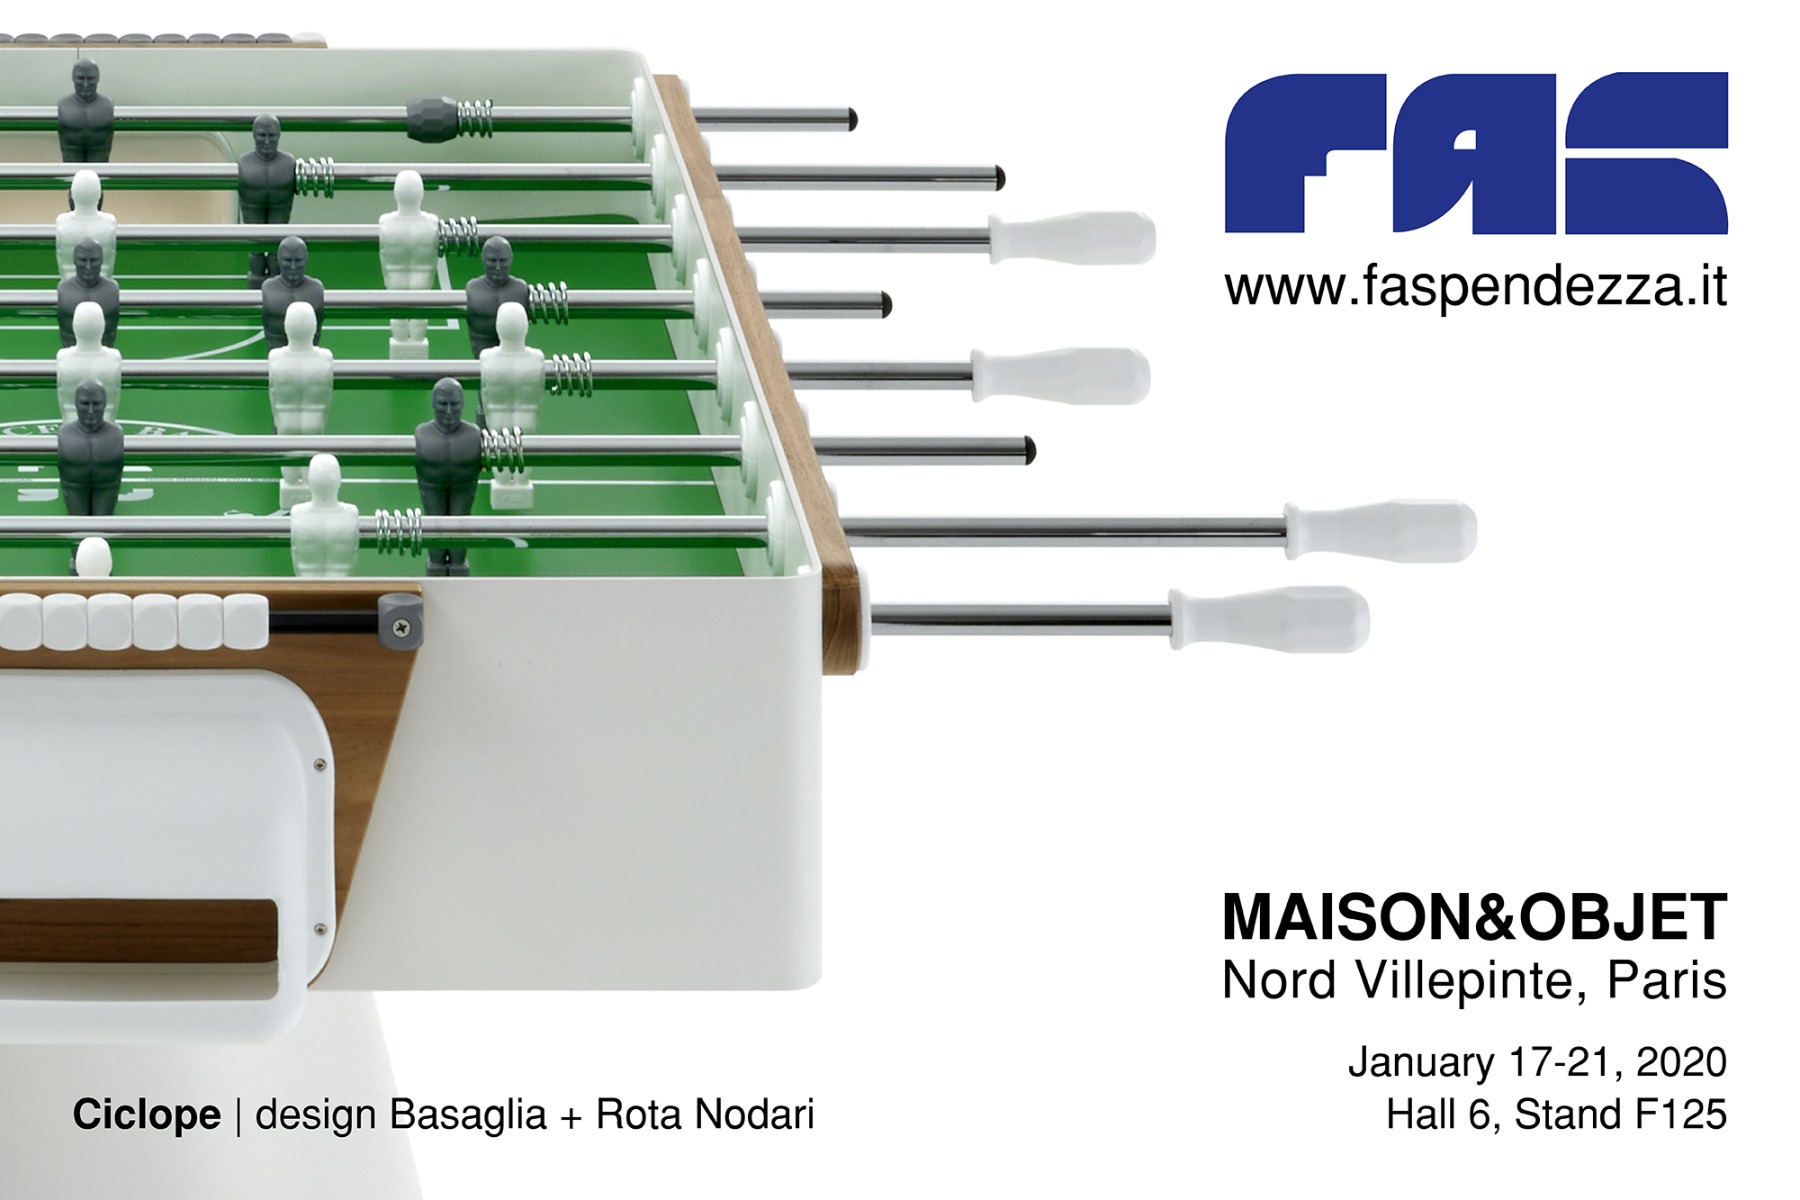 SAVE THE DATE: FAS Pendezza @ Maison&Objet 2020